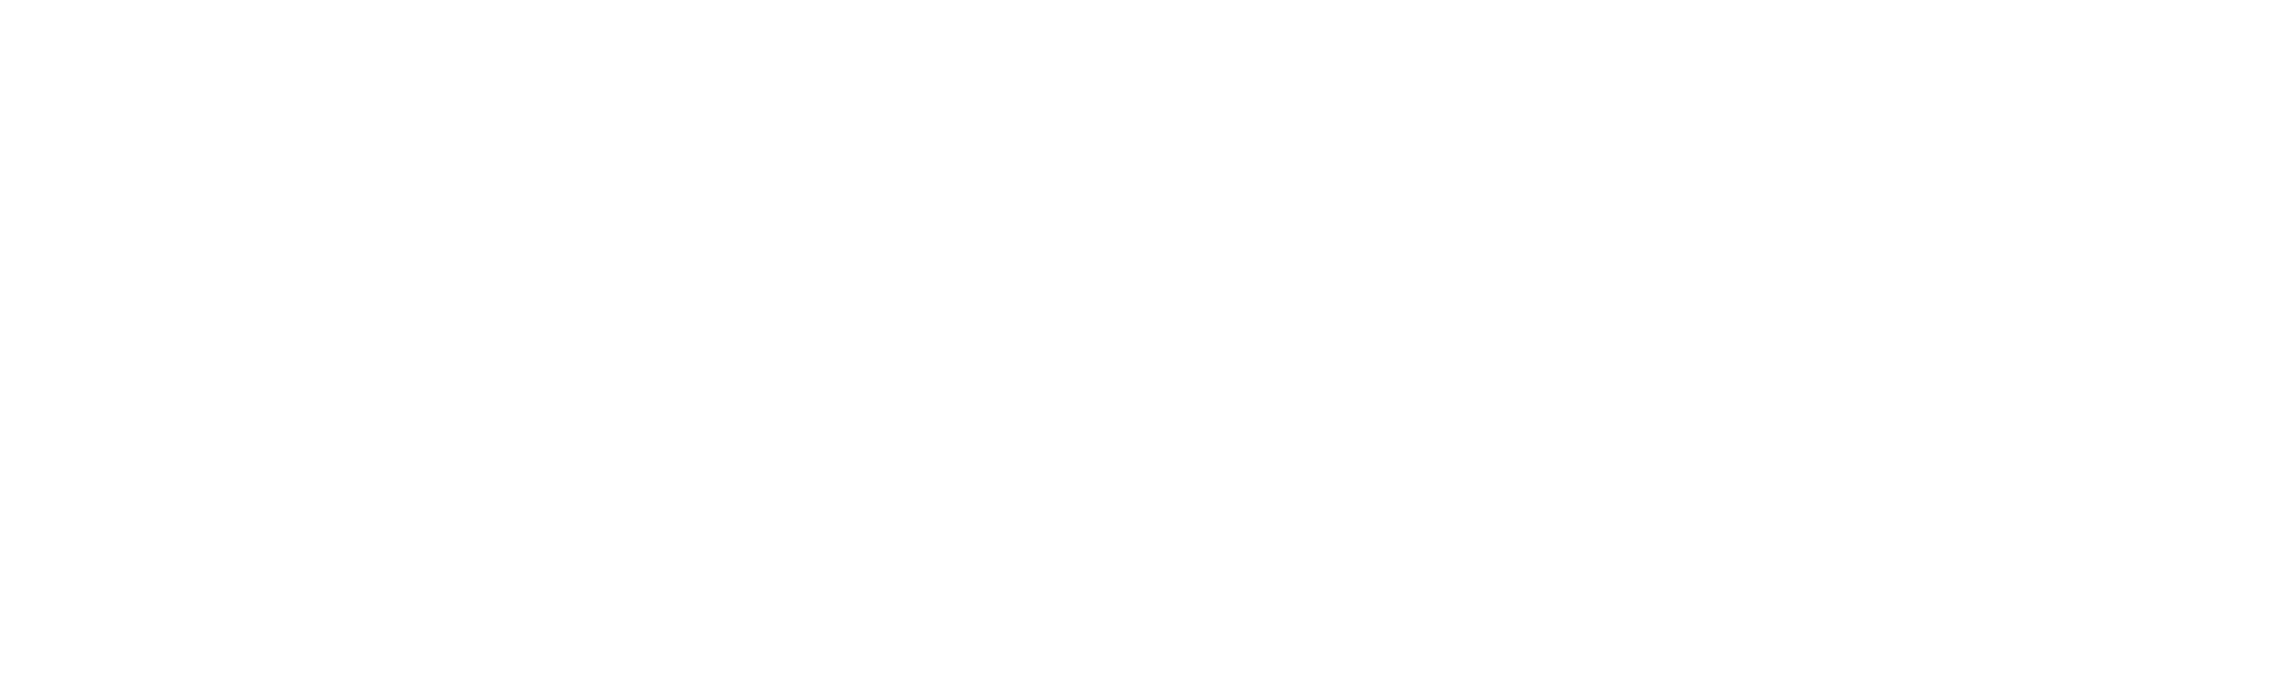 Delivery Hold